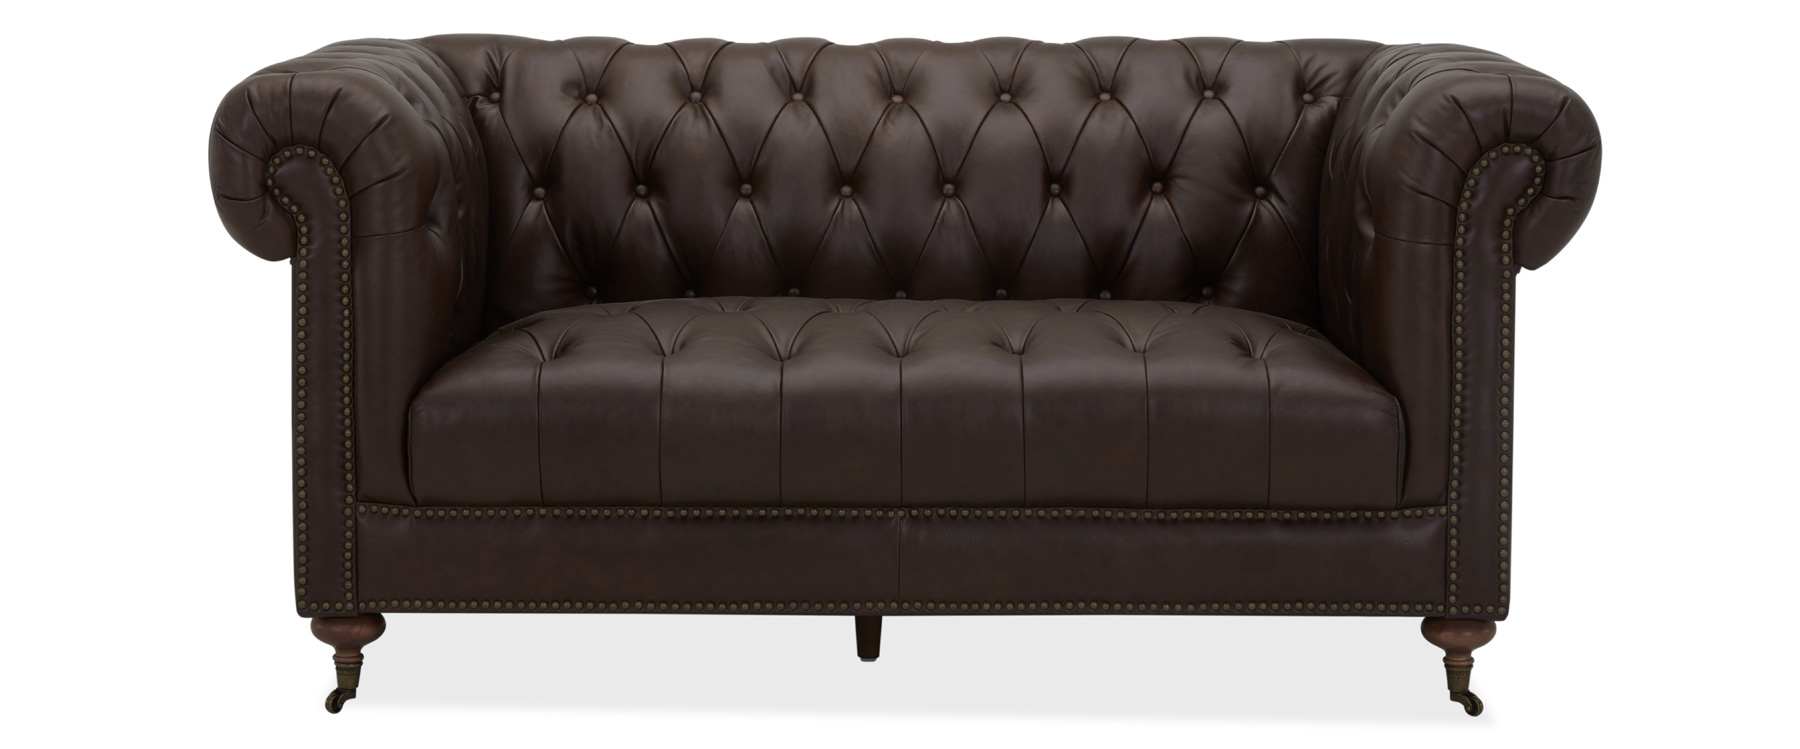 Harlow Brown Leather Chesterfield 2